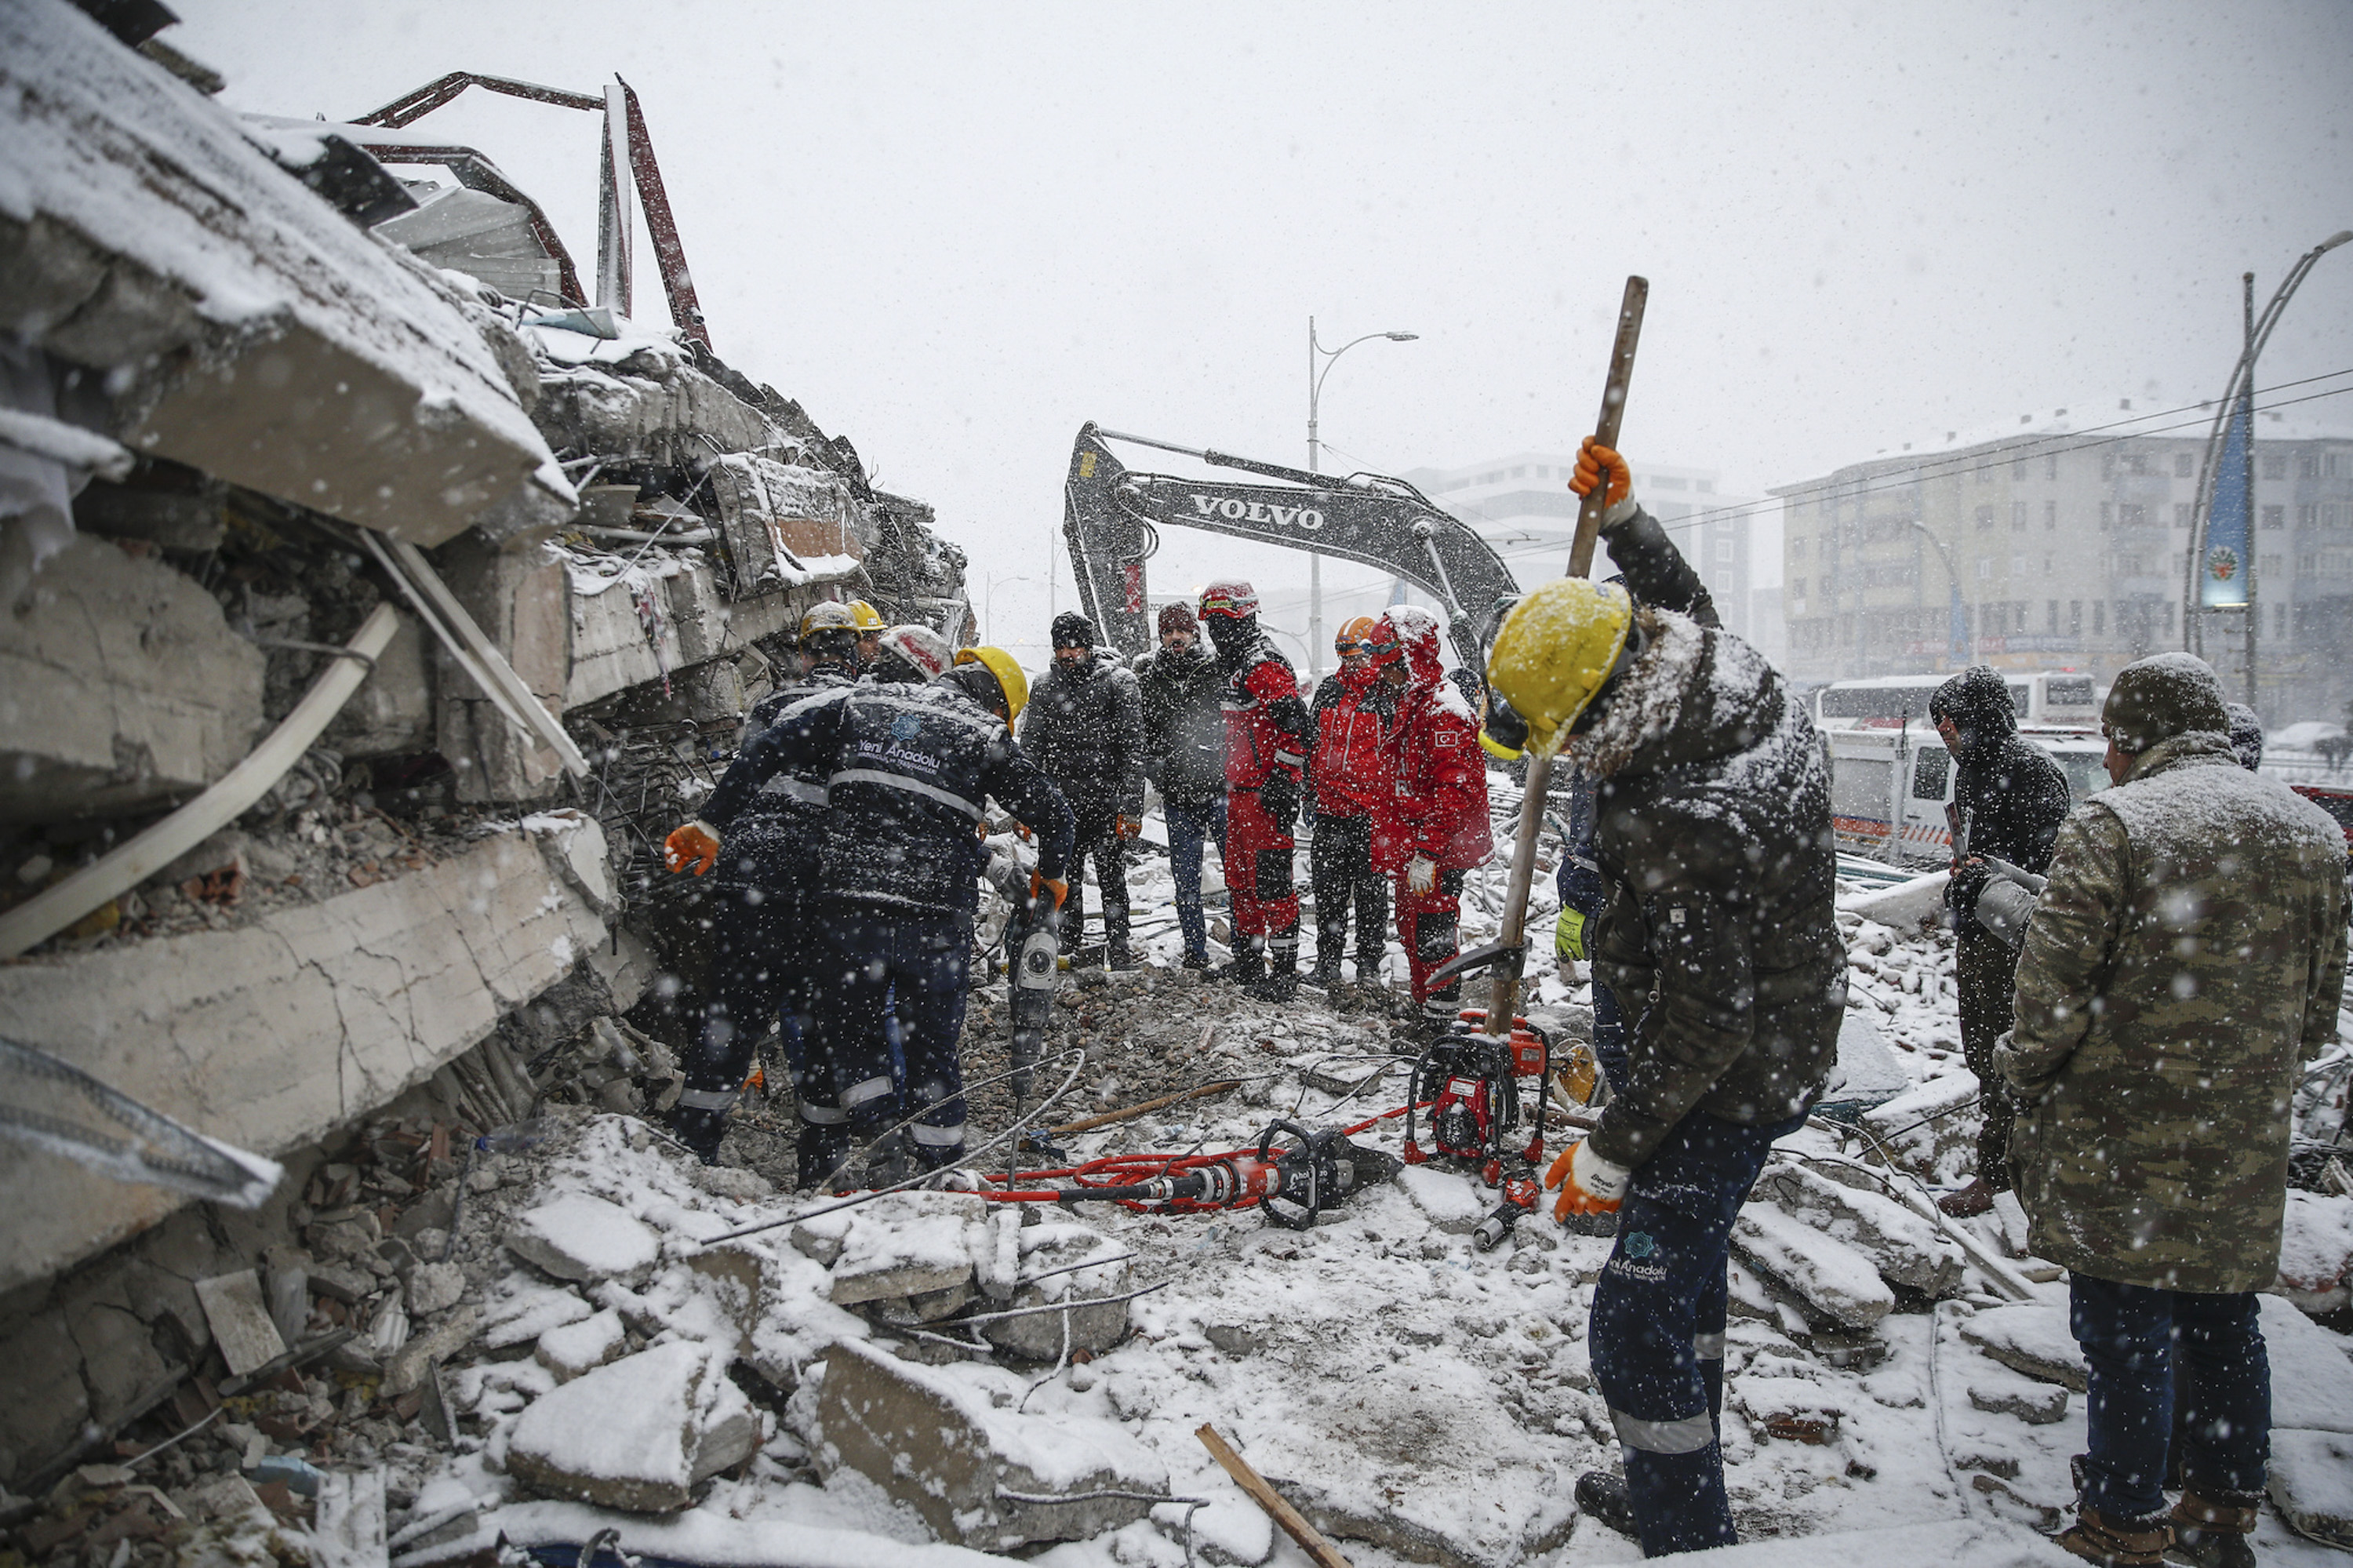 Search and rescue efforts continue through cold weather conditions in Malatya, Turkey, on Tuesday. 